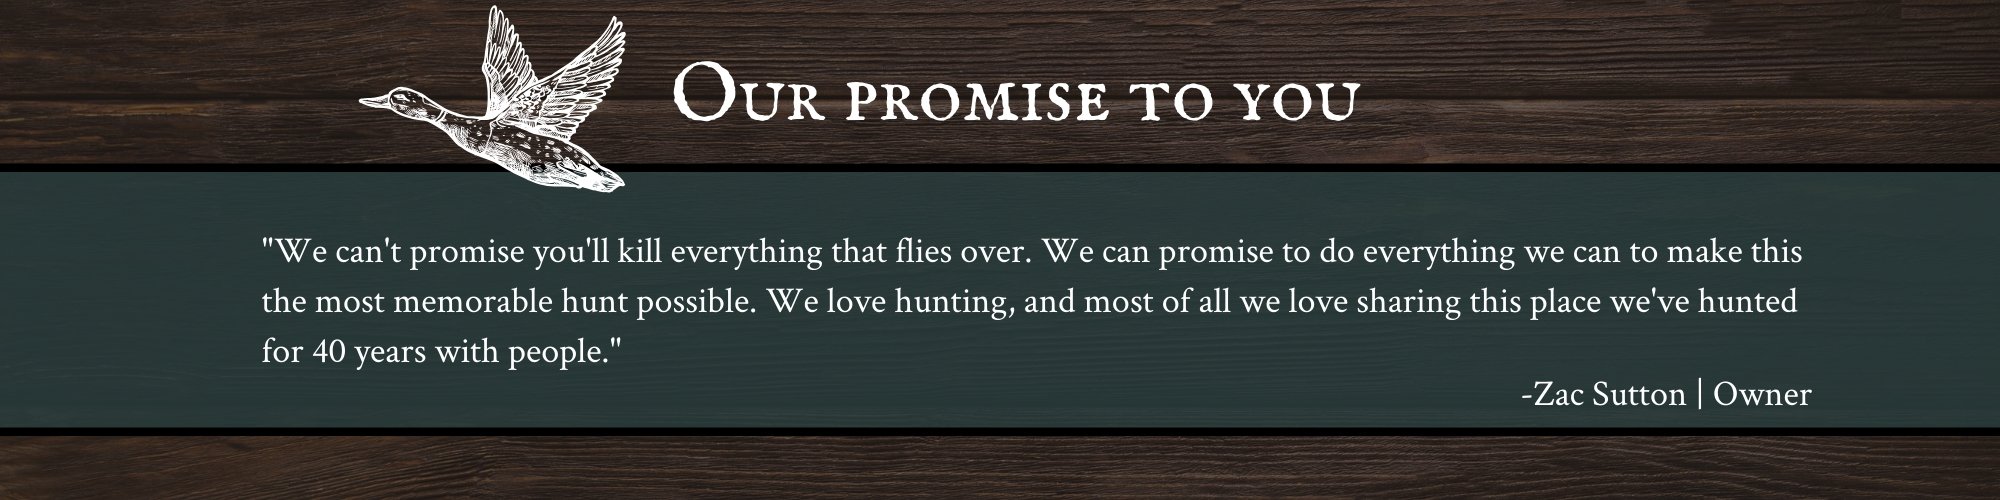 our promise to you 